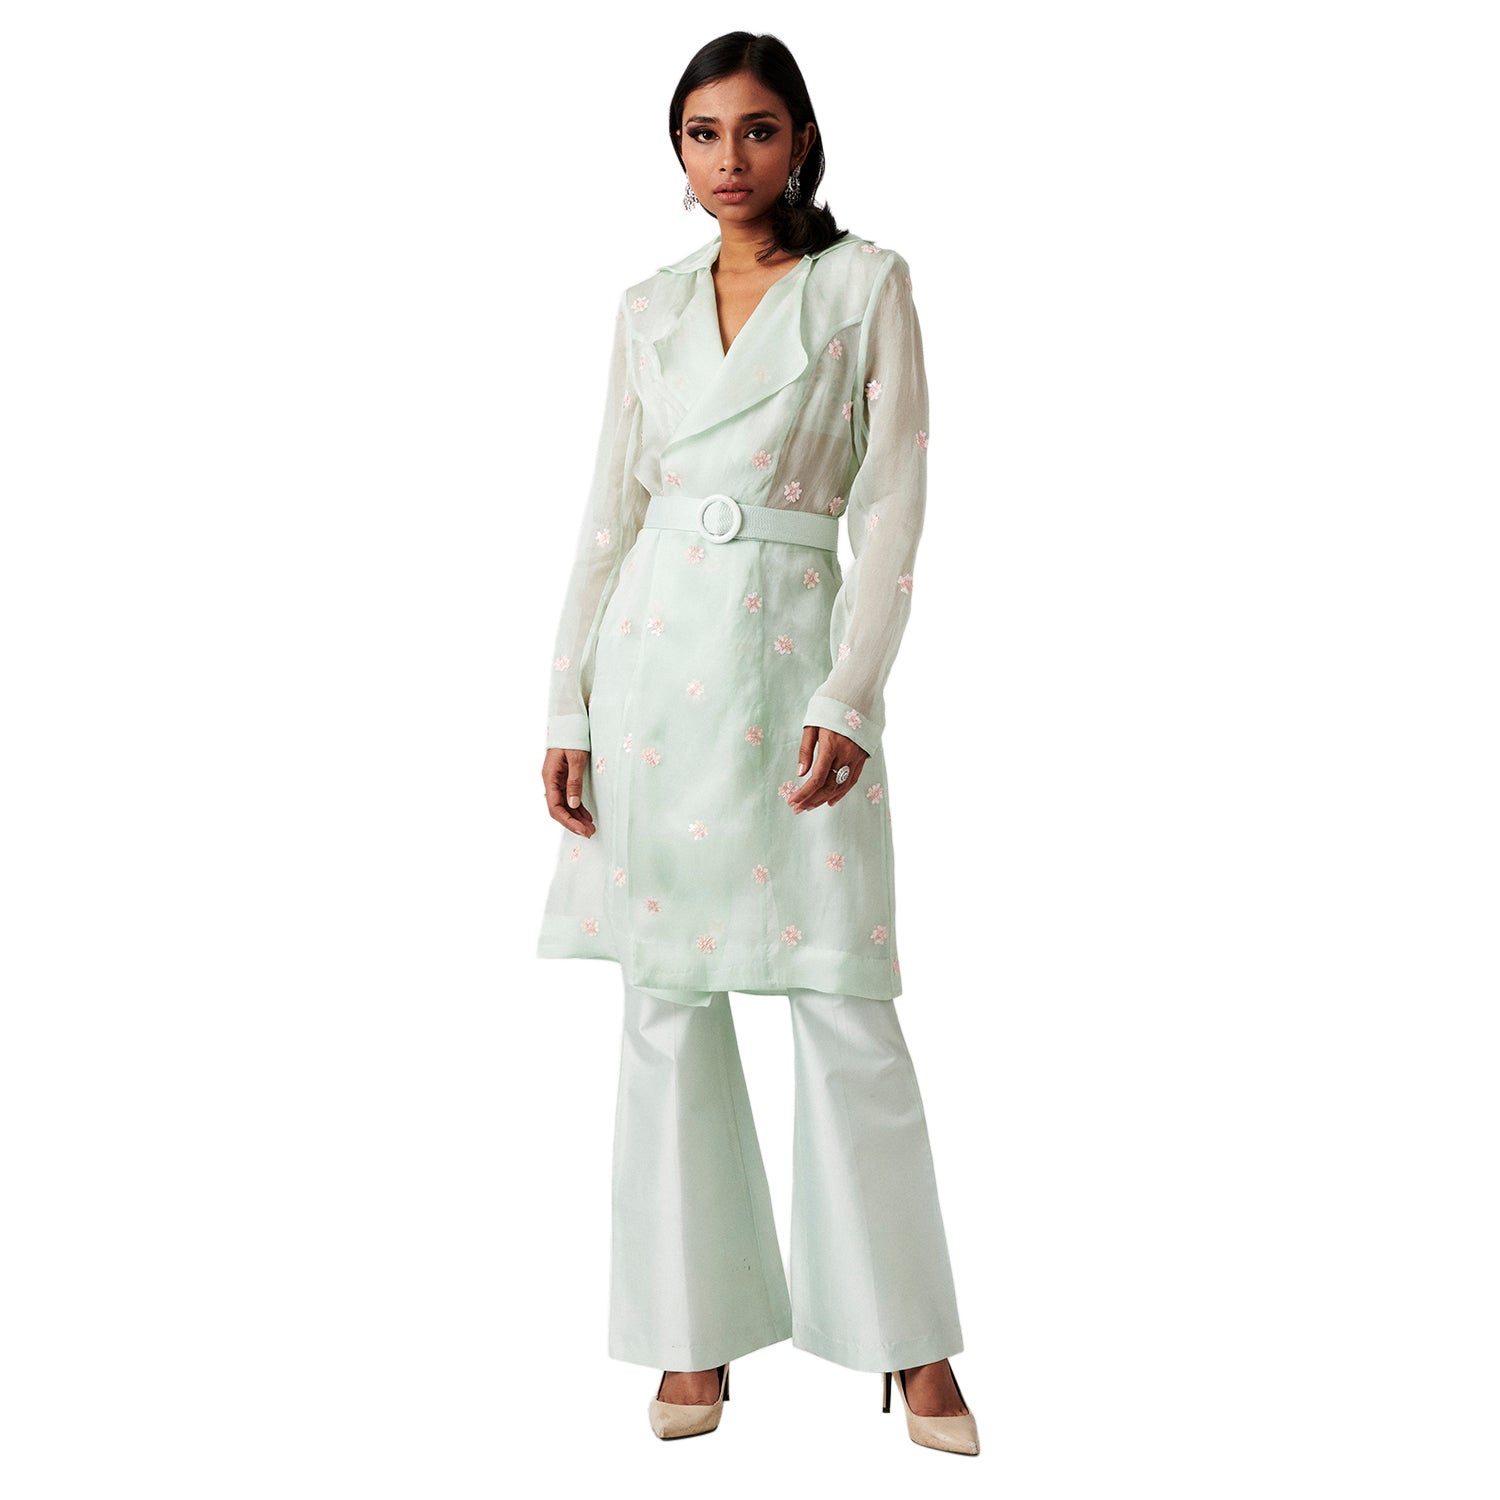 Spearmint Embroidered Sheer Trench